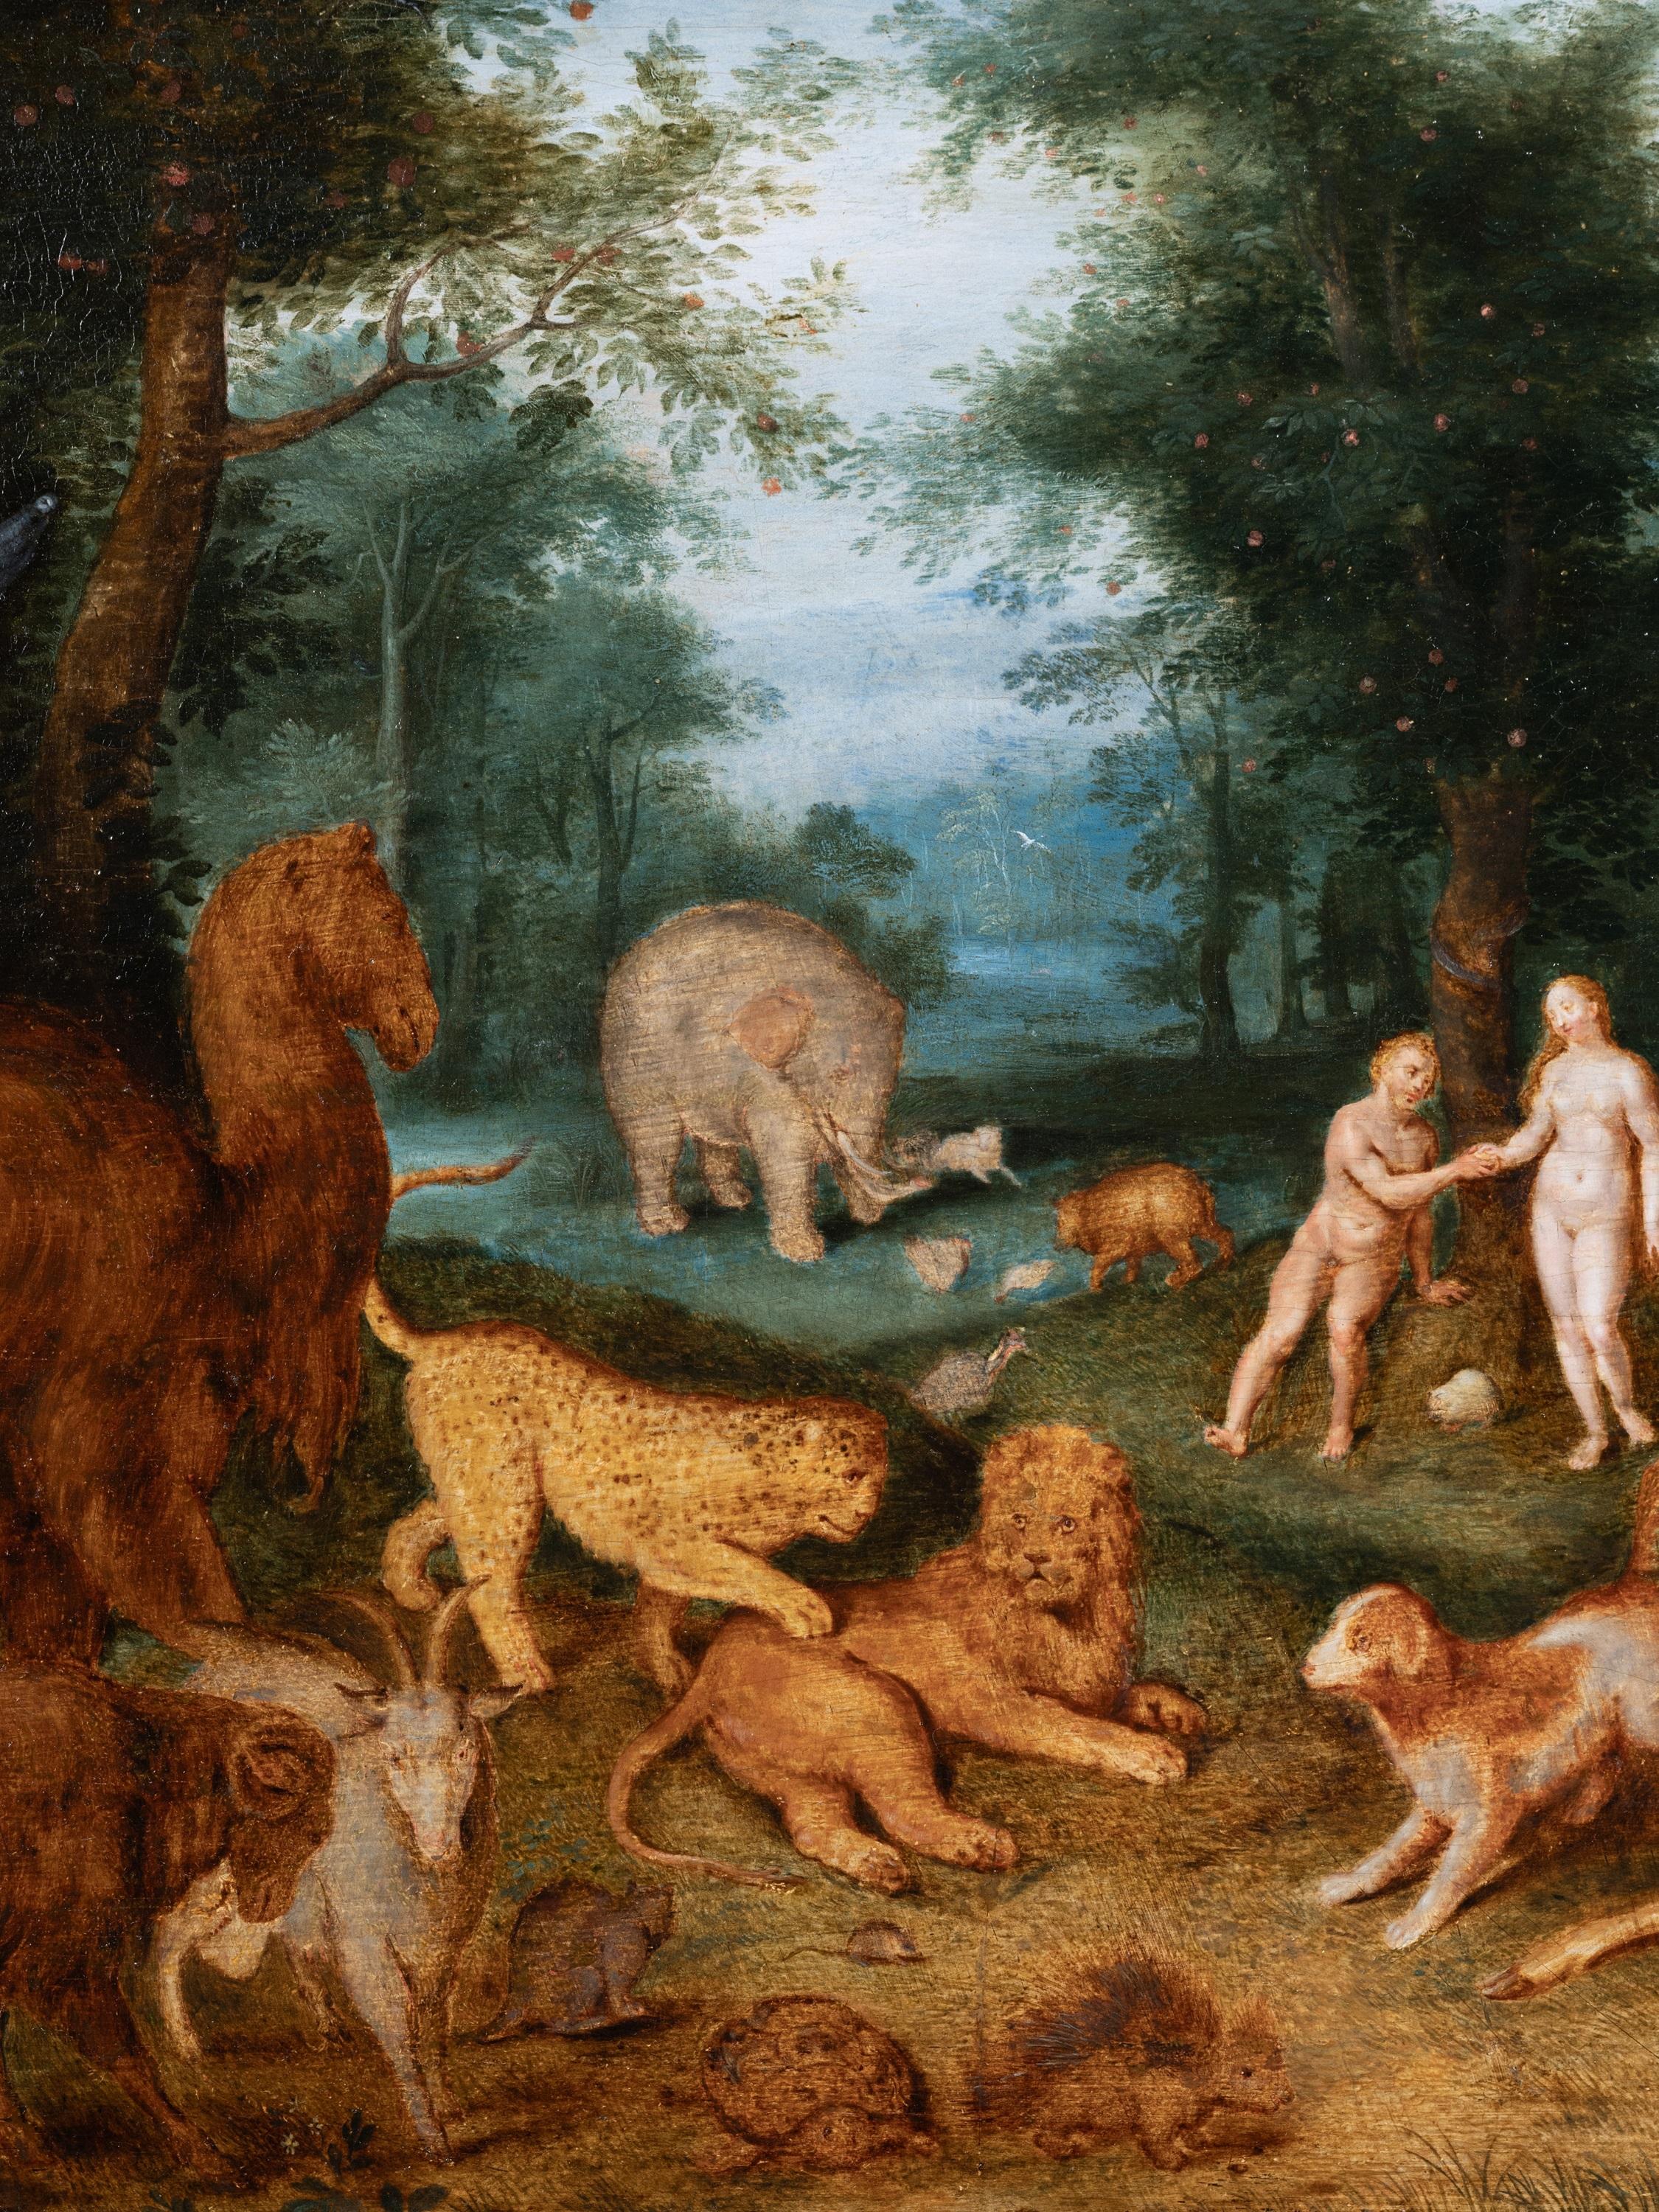 Adam and Eve in paradise, studio of Jan Brueghel the Younger, 17th century - Old Masters Painting by Studio of Jan Brueghel the Younger